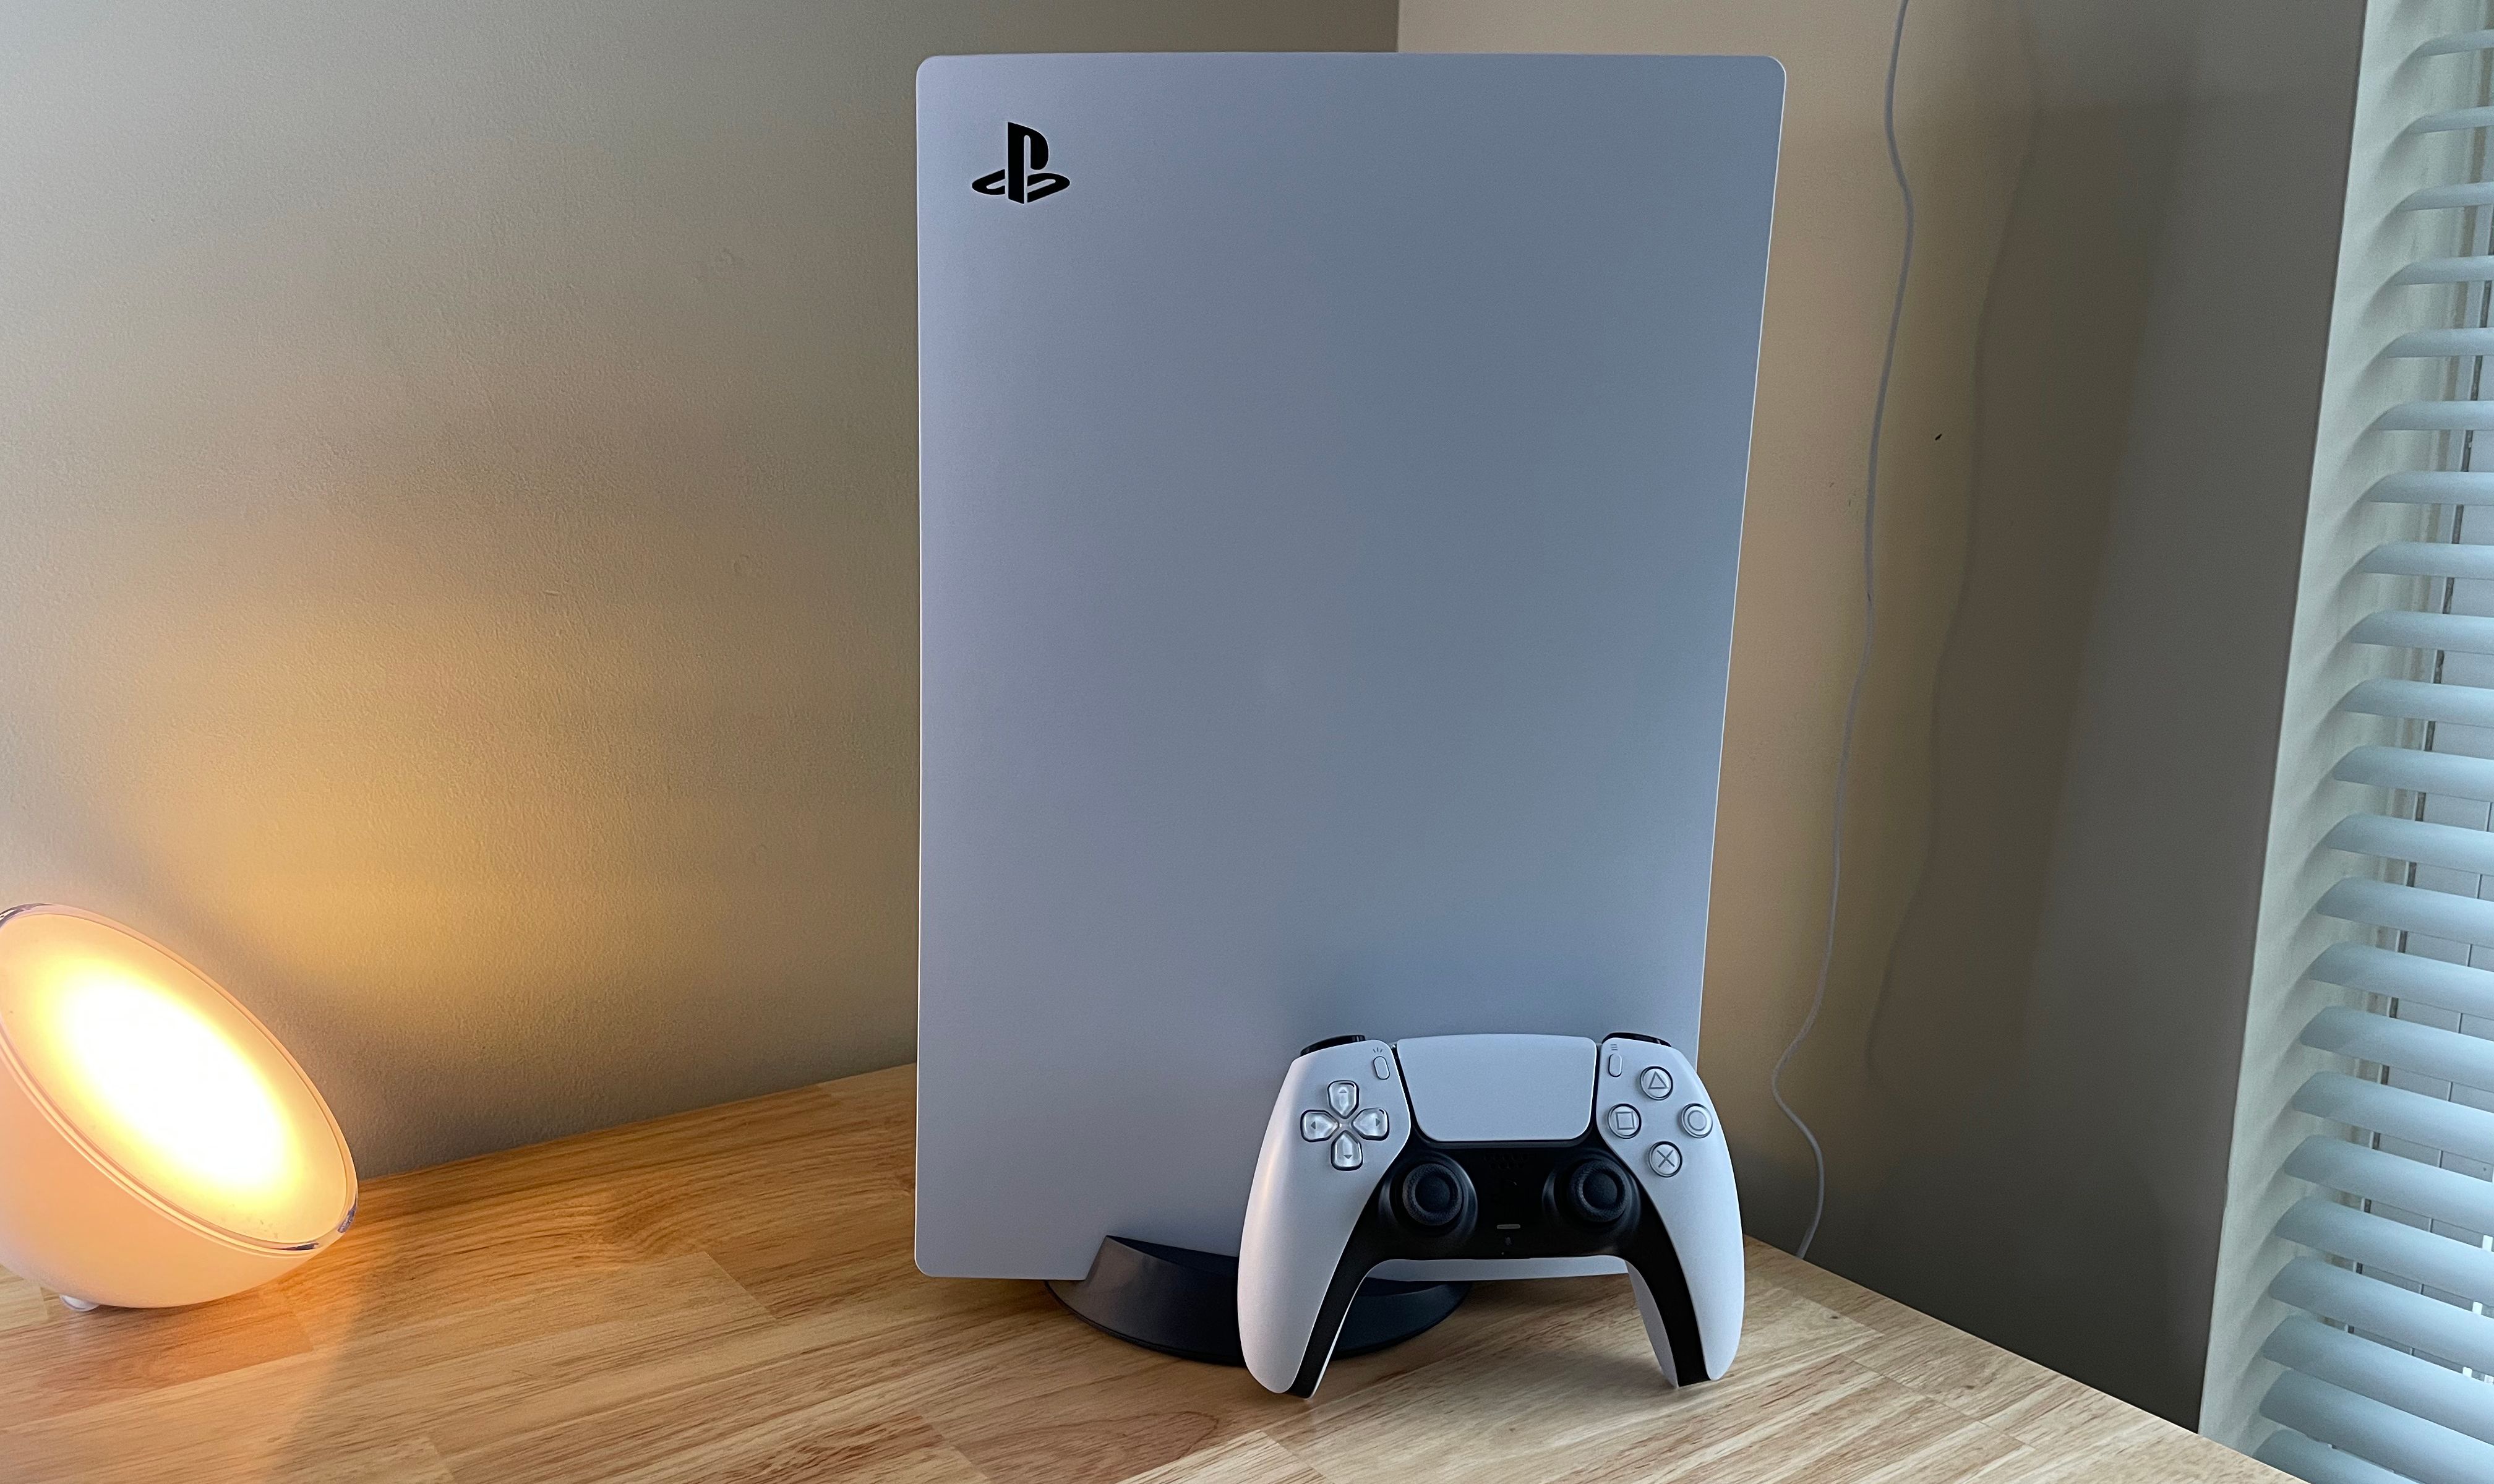 Sony confirms it will sell PlayStation 5 direct to consumers in Europe